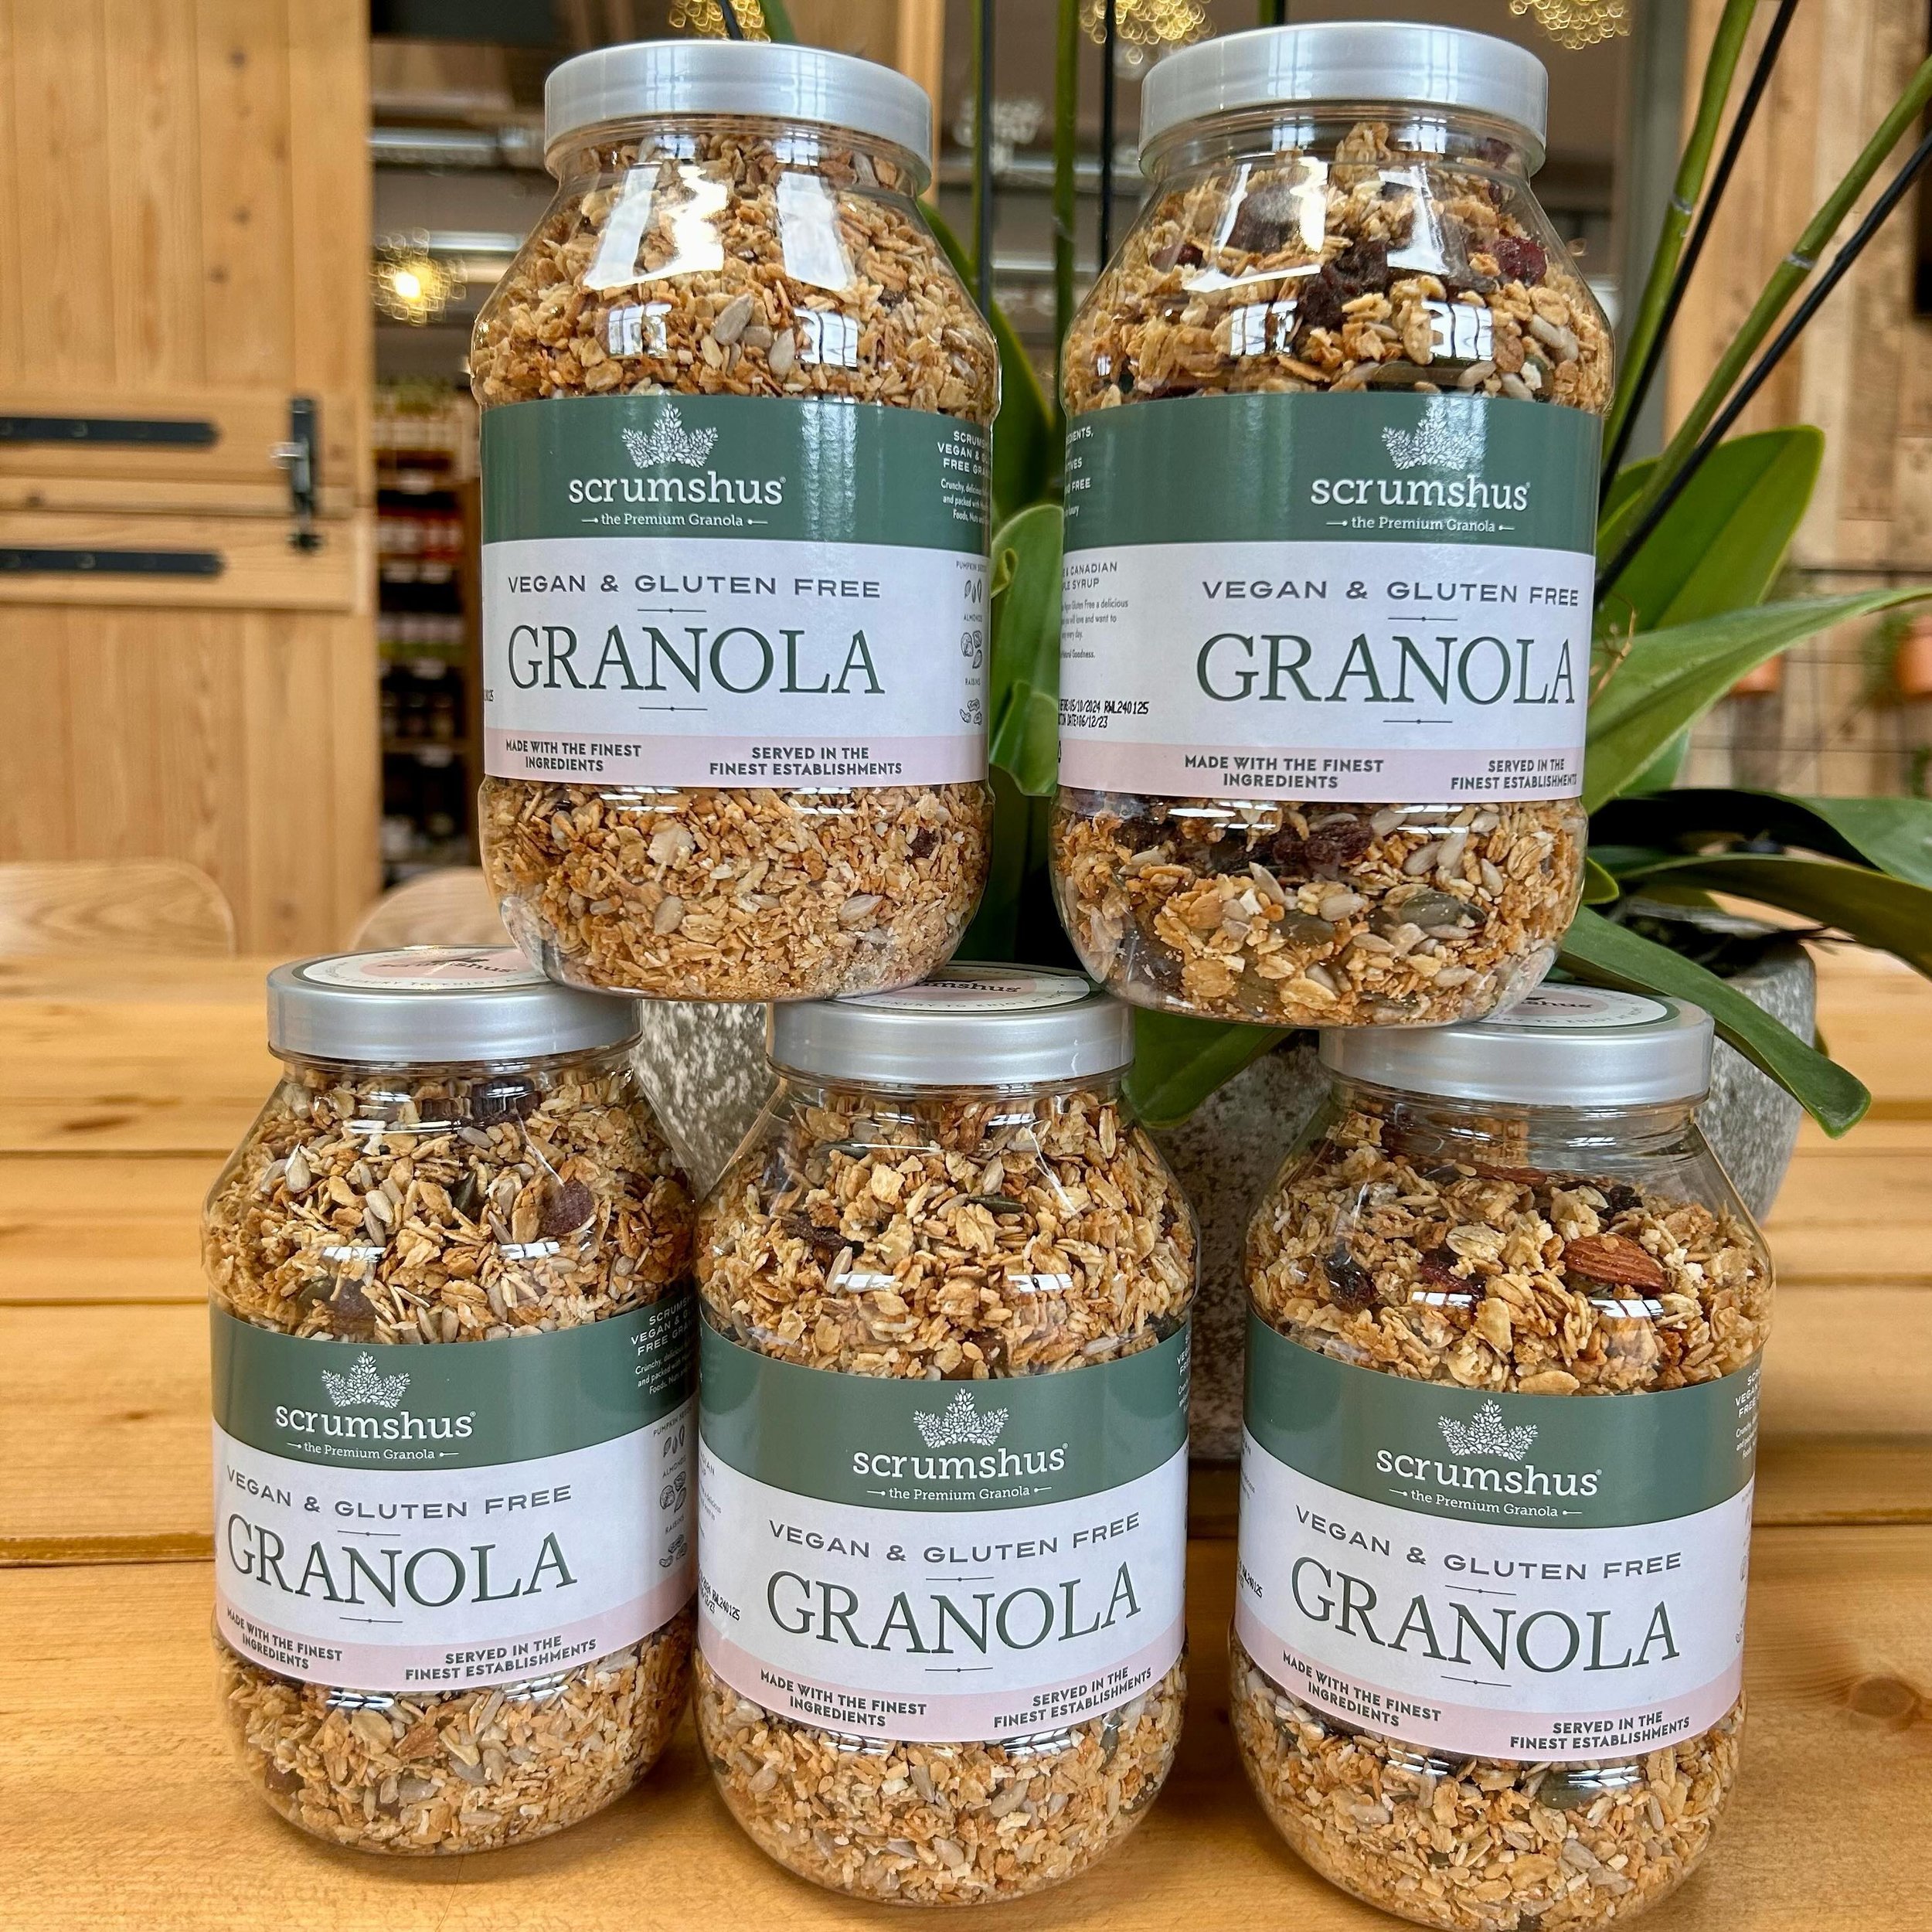 Spotlight Sunday - @scrumshus.granola 🔦🌟

Fay Miller (Founder of Scrumshus Granola), started donating her home-baked granola at charity gift fairs, and it became very popular! As demand grew, Fay began selling it to friends and family, and it soon 